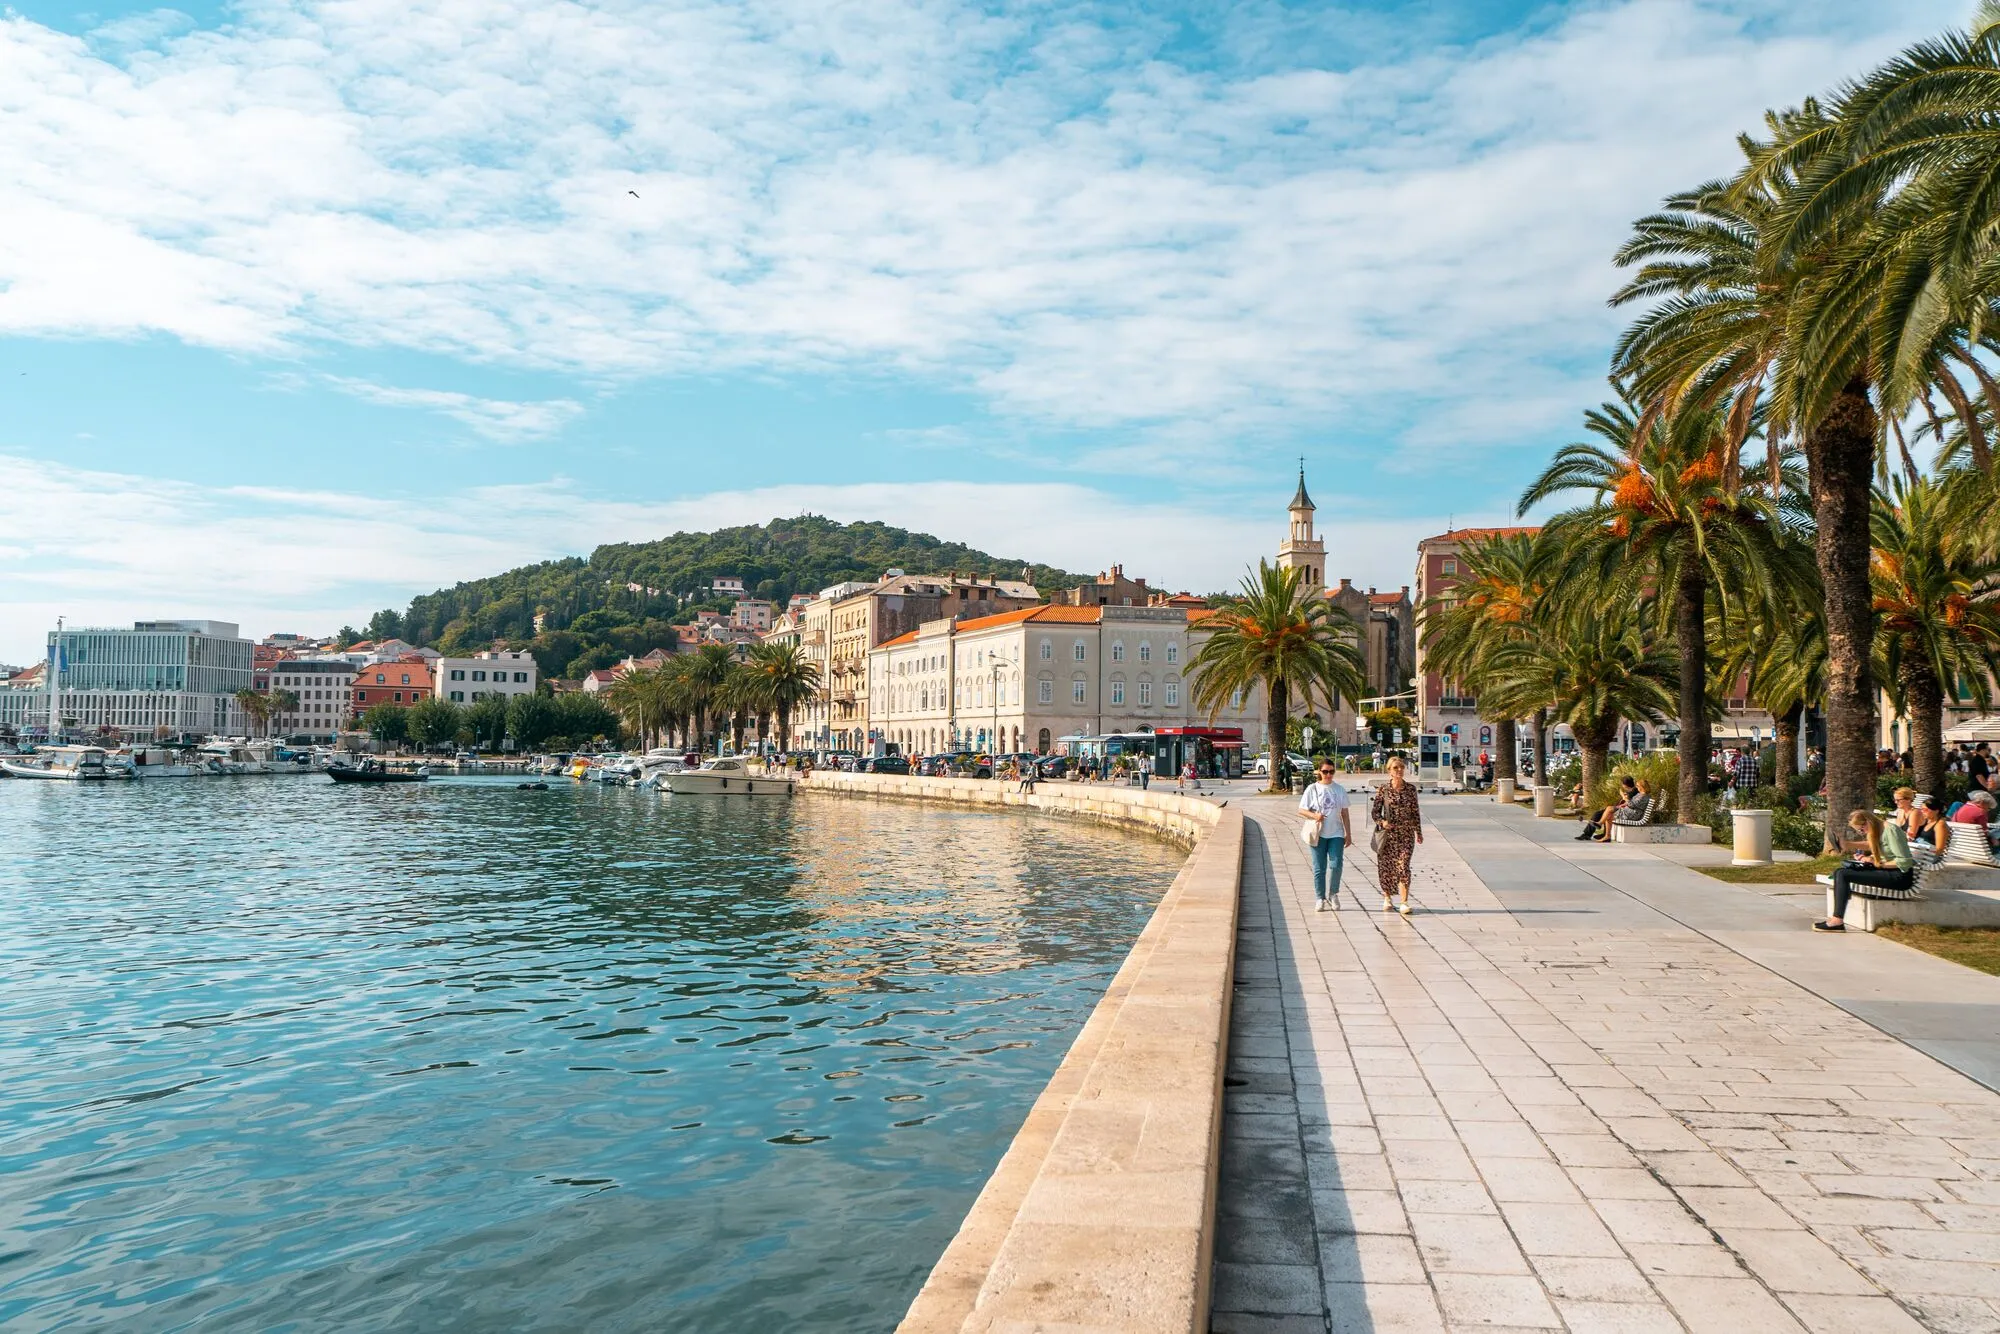 12 Awesome Things to Do in Split for First-Timers - A Complete Guide to Backpacking Split